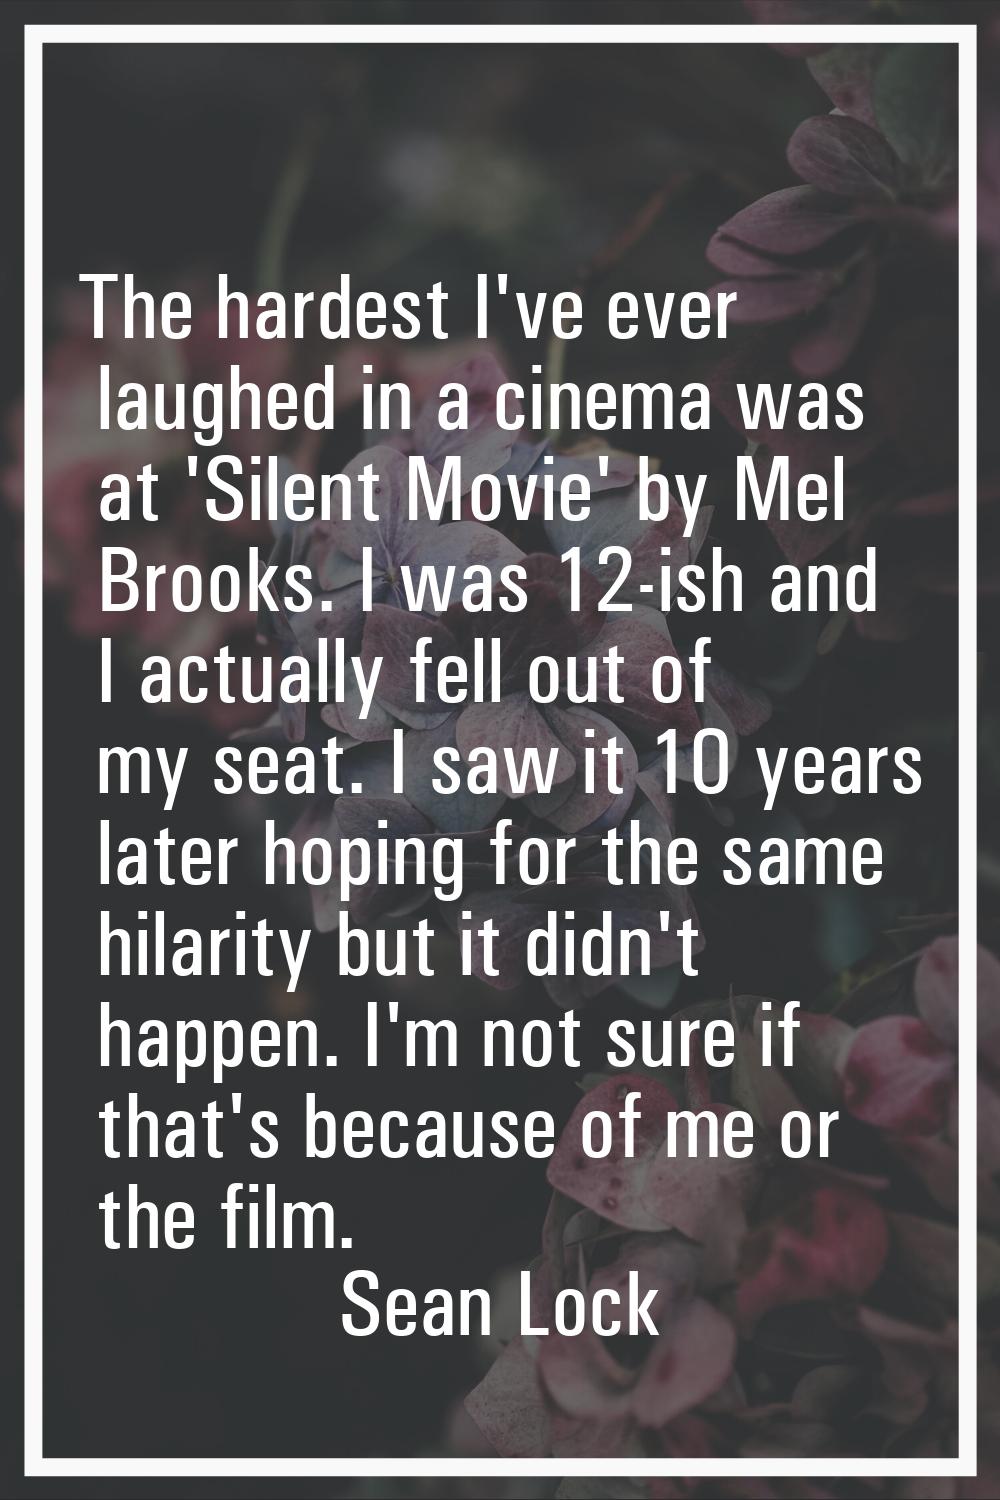 The hardest I've ever laughed in a cinema was at 'Silent Movie' by Mel Brooks. I was 12-ish and I a